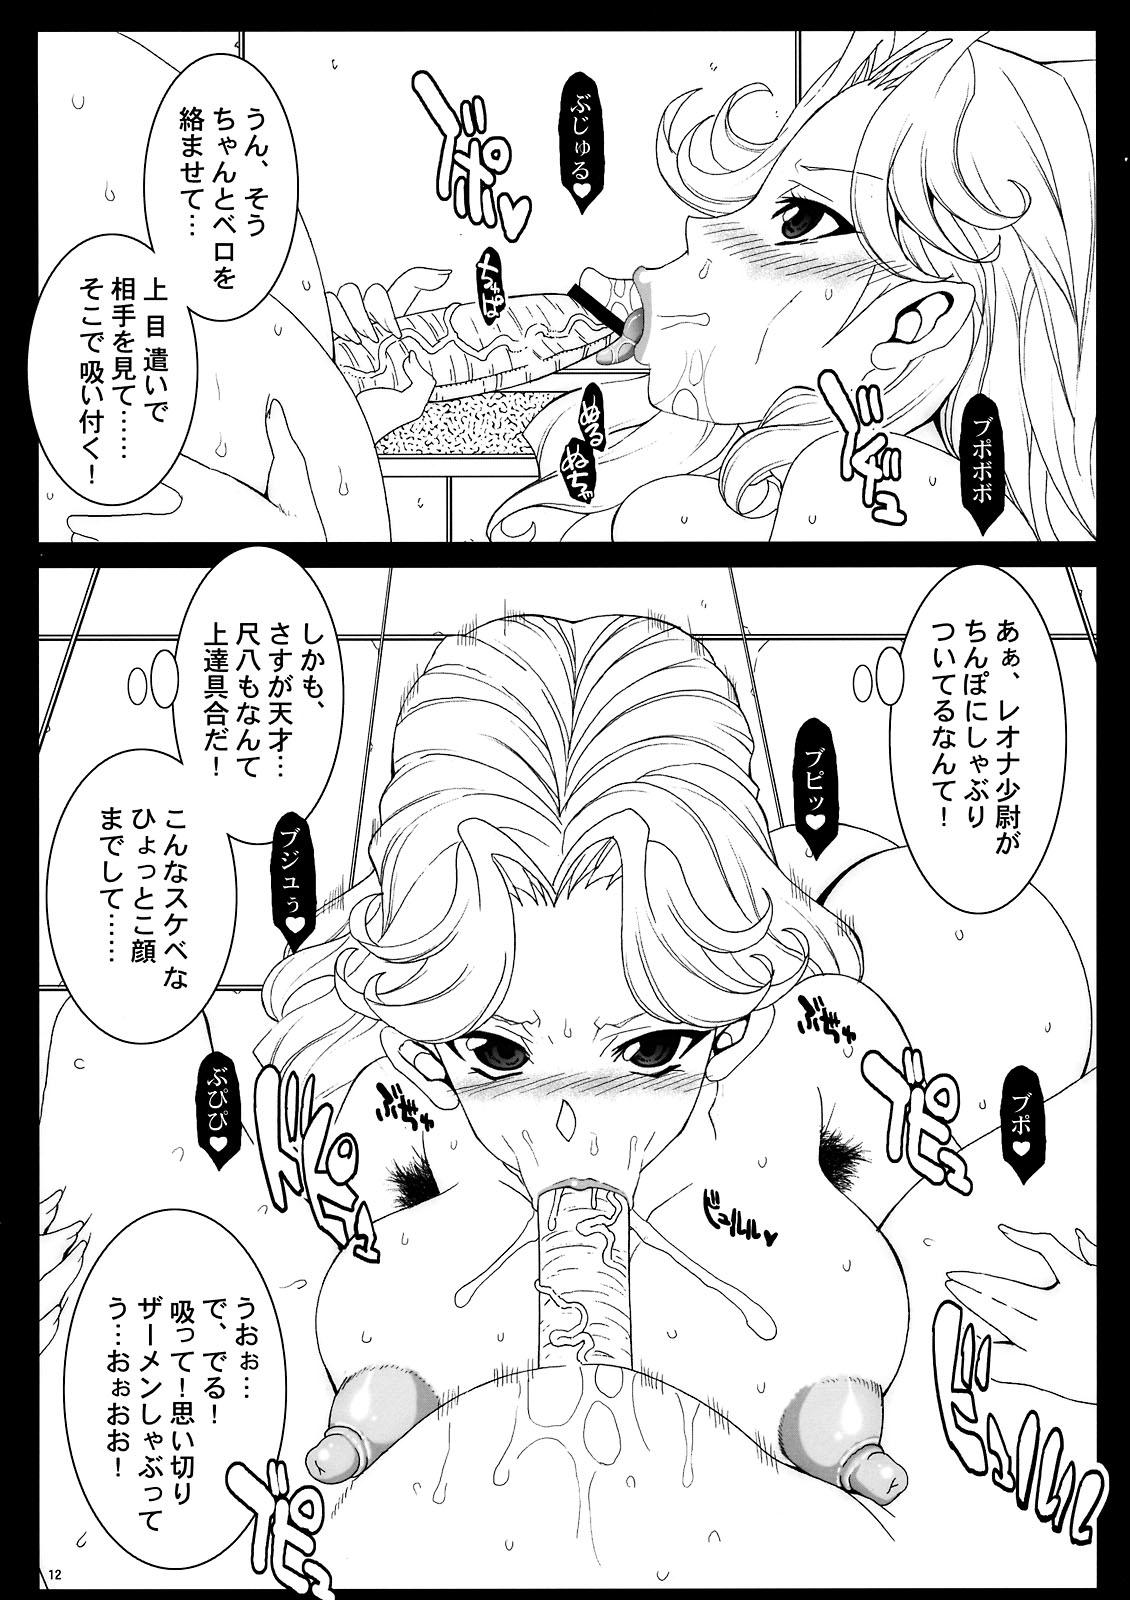 Shaved Pussy Aegis･Russell - Super robot wars Sharing - Page 12